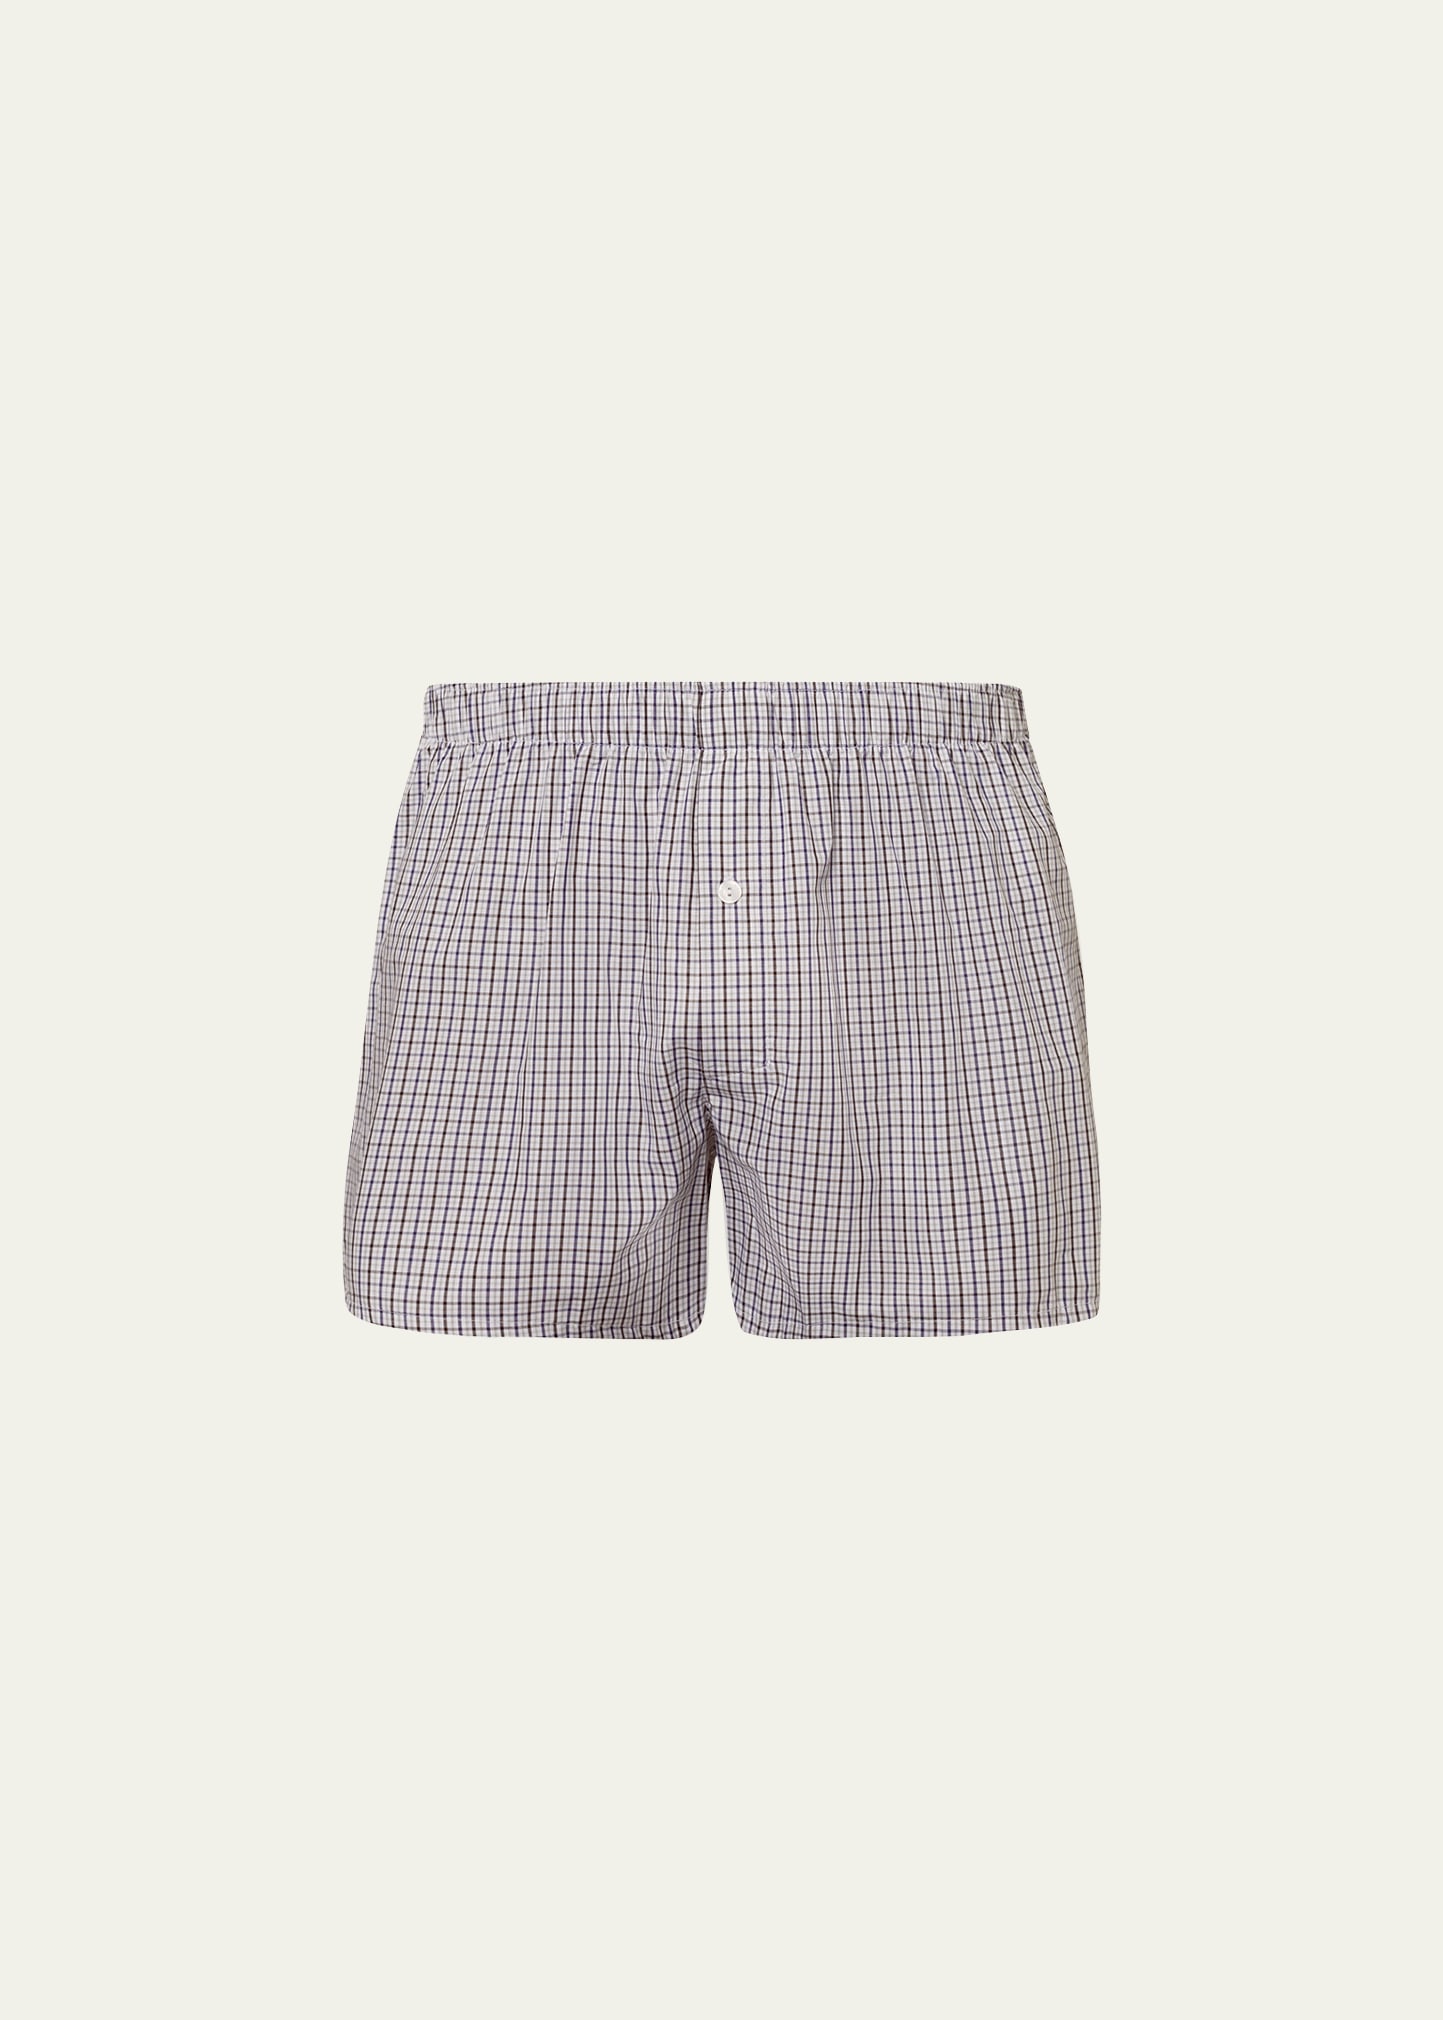 Shop Hanro Men's Fancy Woven Cotton Boxers In Shaded Check